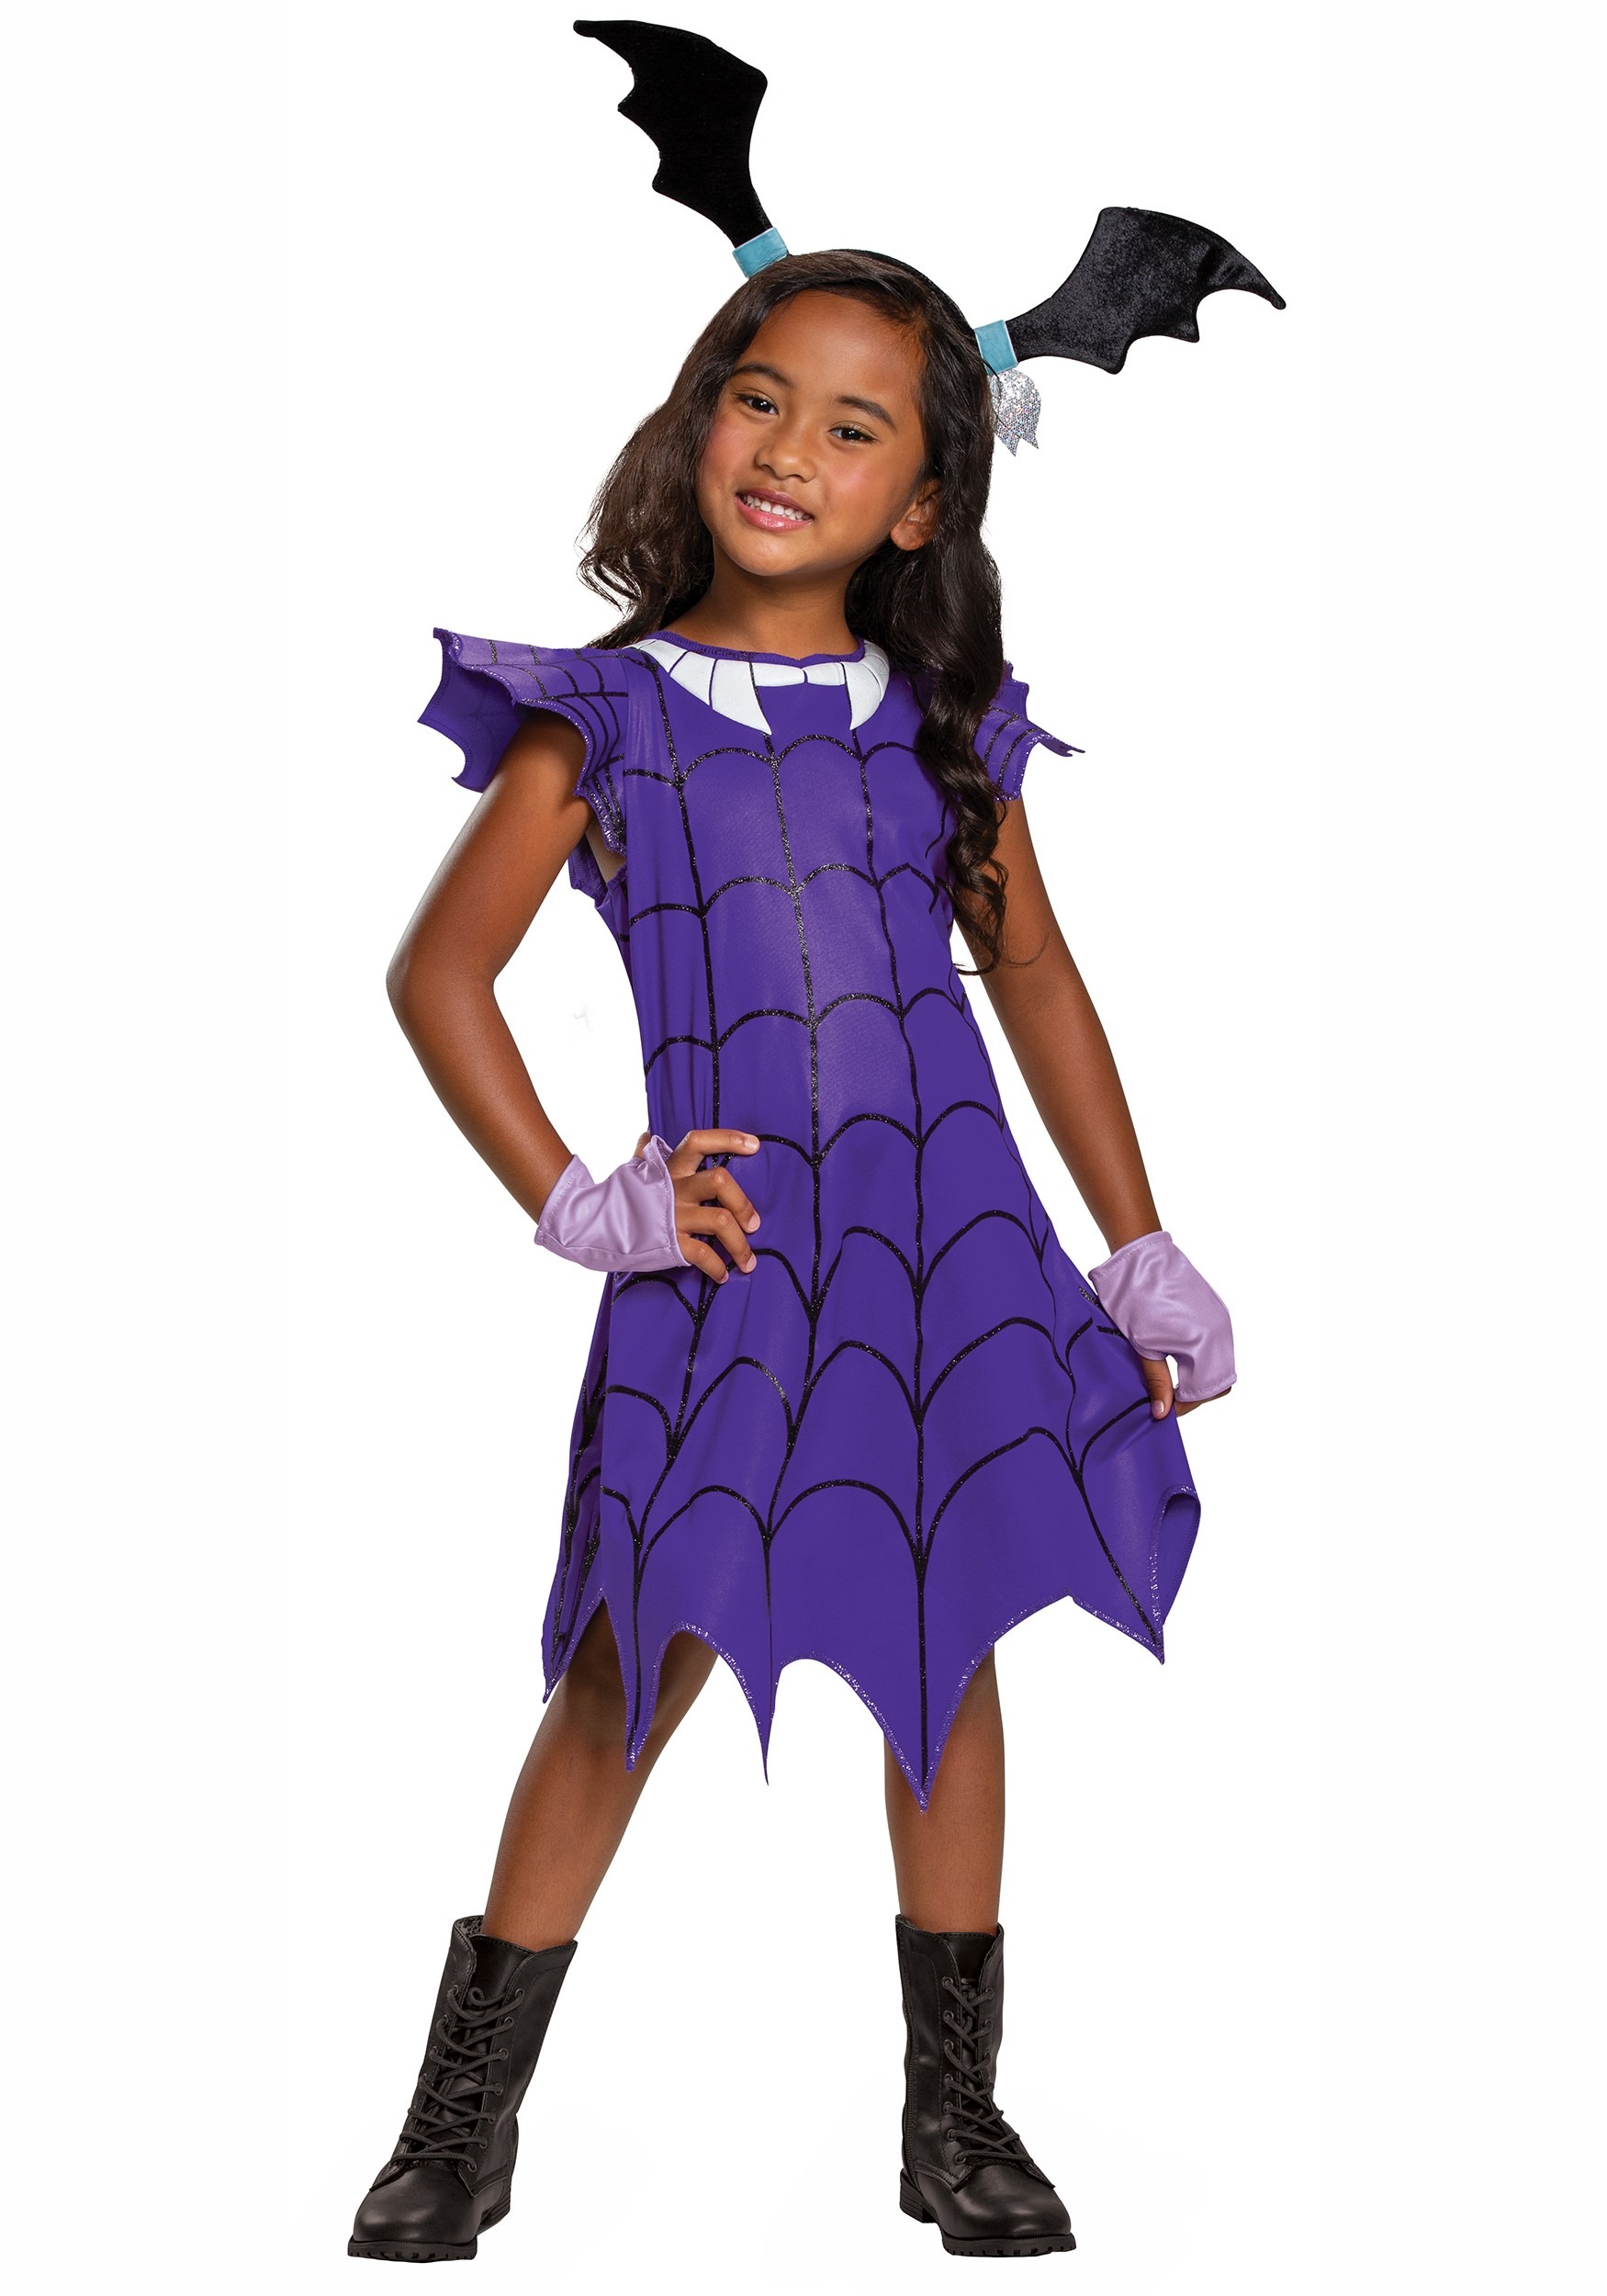 Alice's Bakery Toddler Rosa Classic Costume